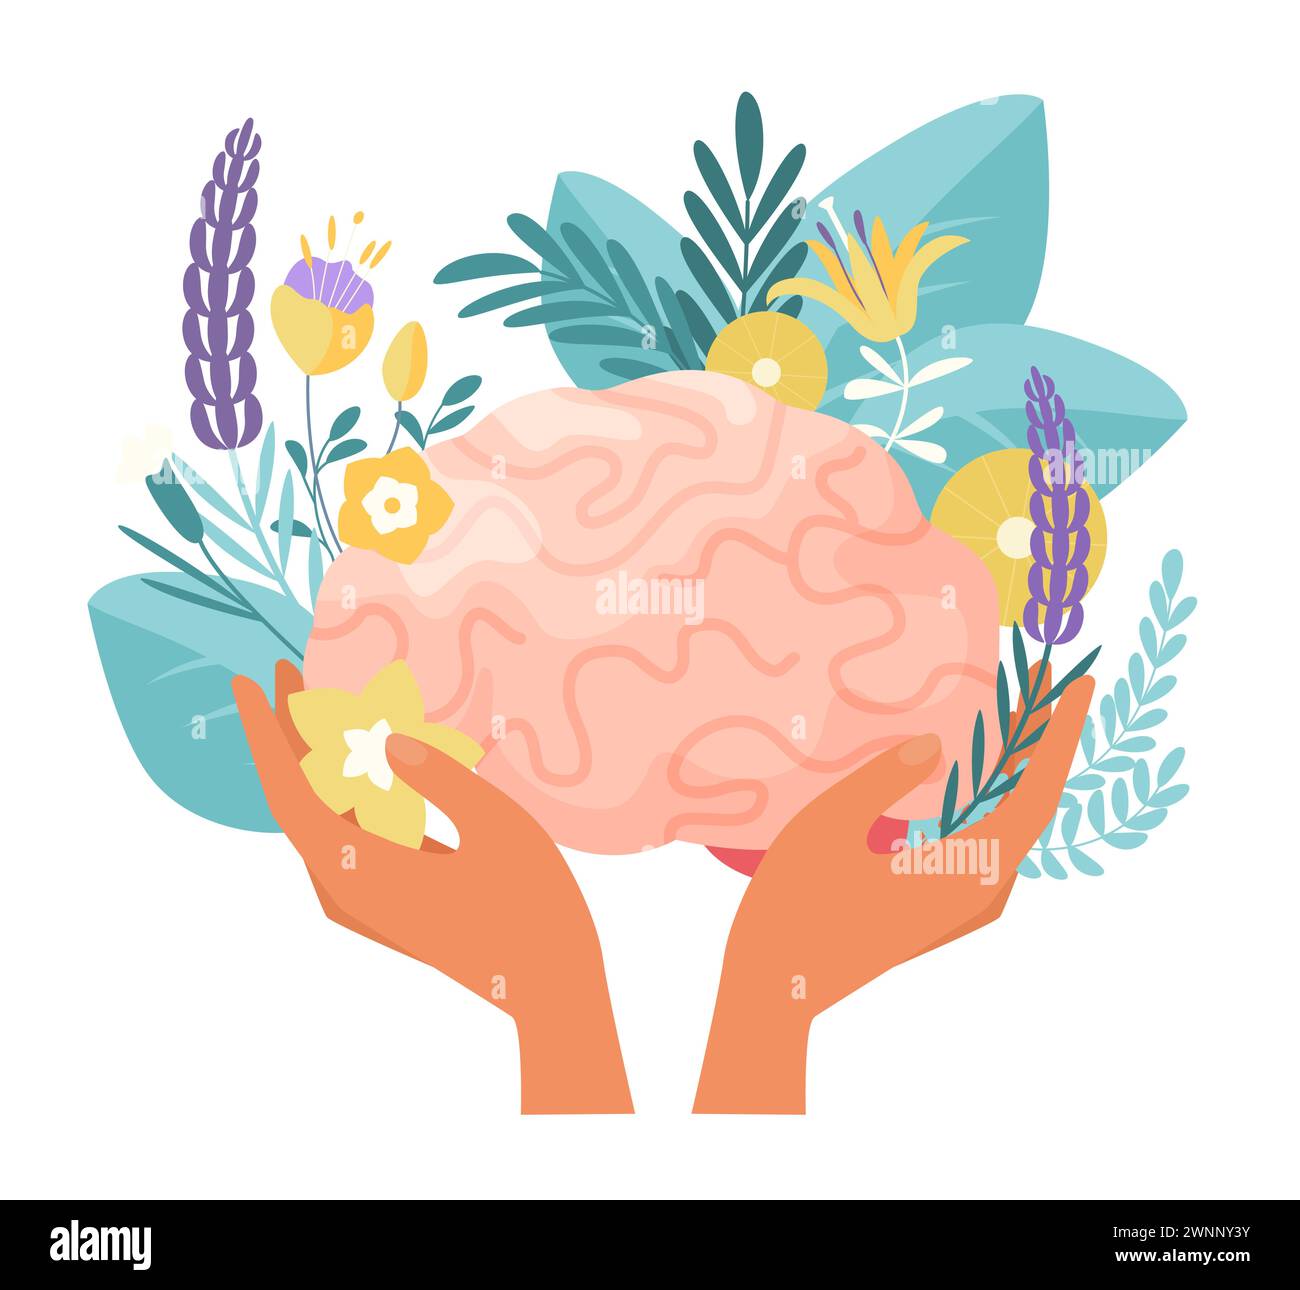 Mental health, brain health care and psychotherapy, adaptation training and psychology counseling. Hands holding human brain with summer wild flowers and green leaves cartoon vector illustration Stock Vector